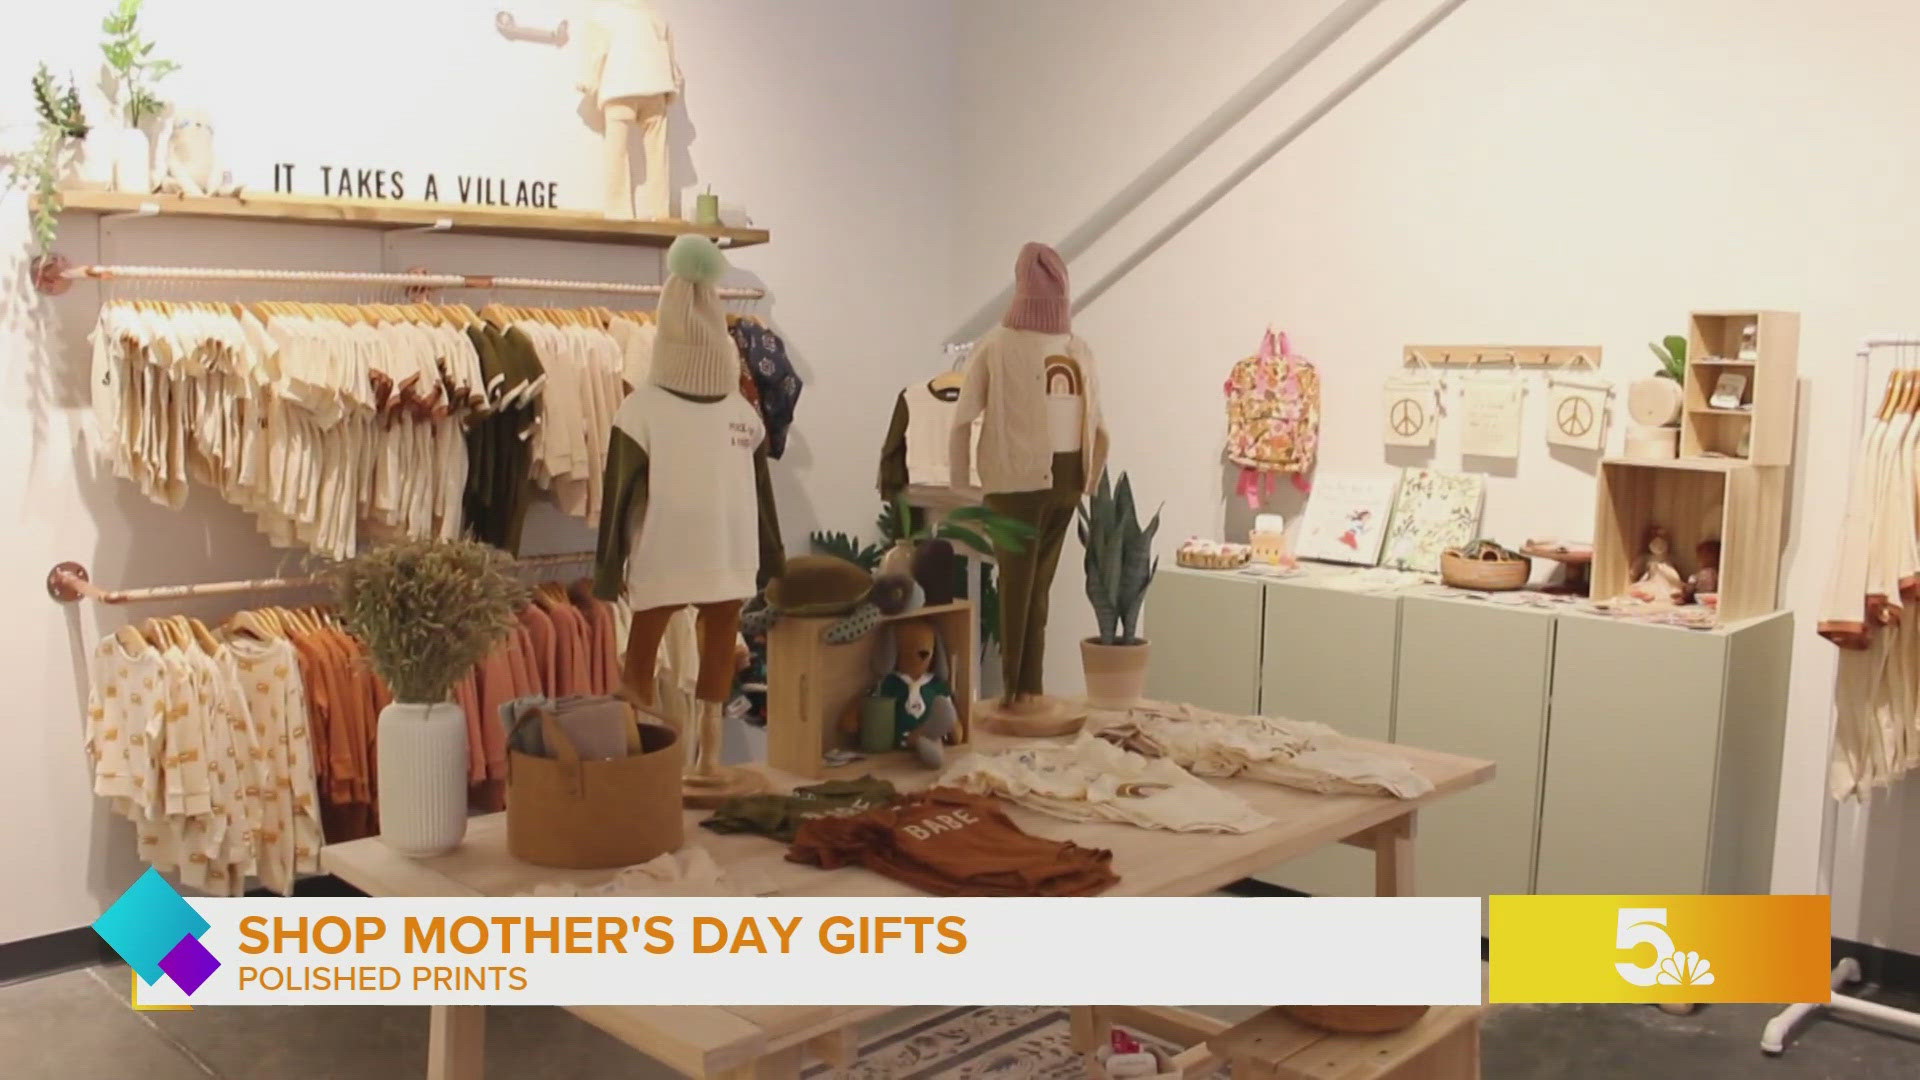 Shop for mom by stopping in this cute boutique store in the Foundry.